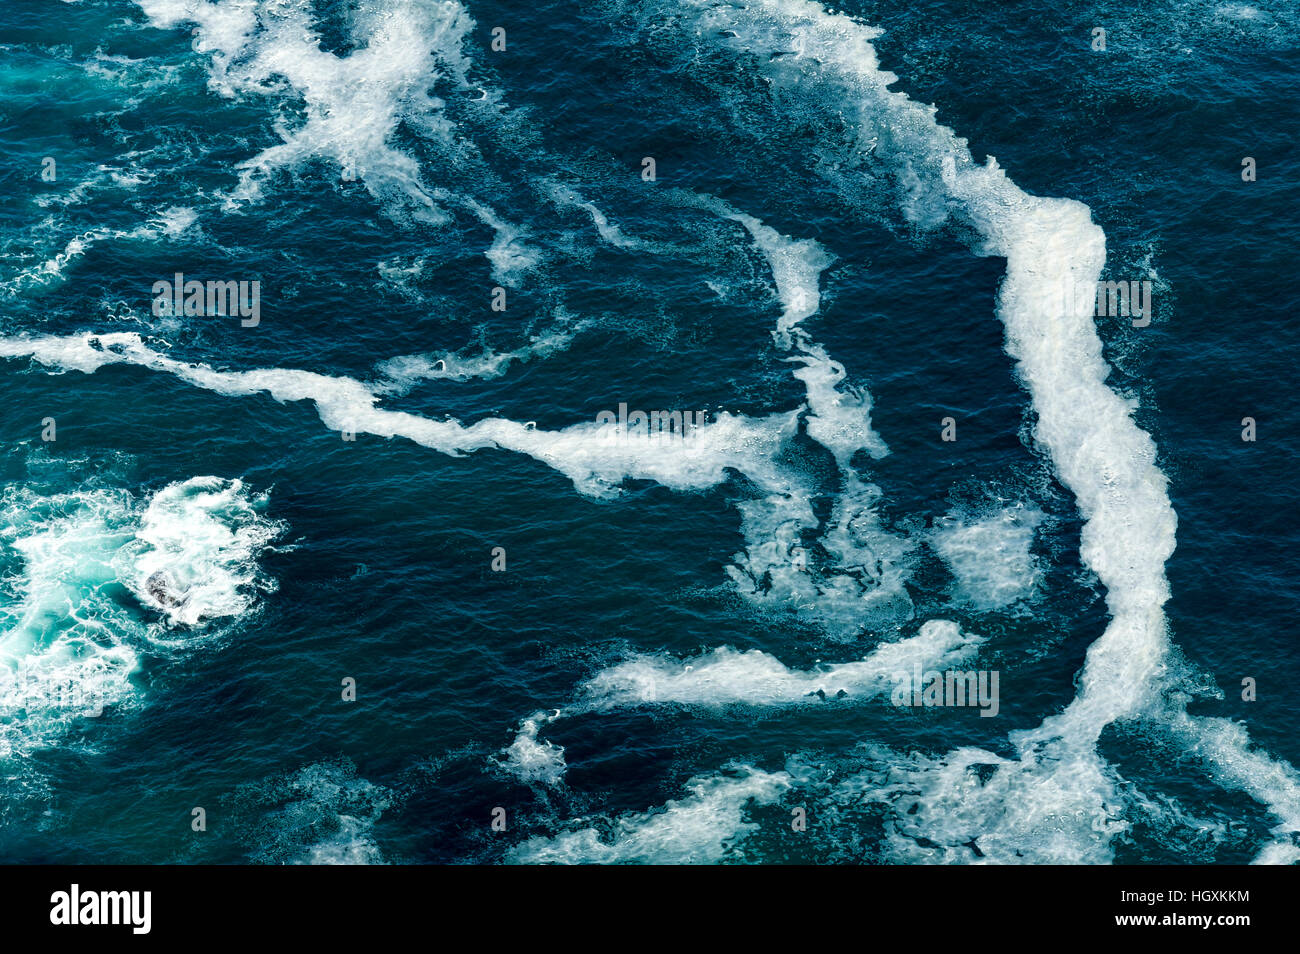 Wave foam trapped in currents along the base of coastal cliffs. Stock Photo